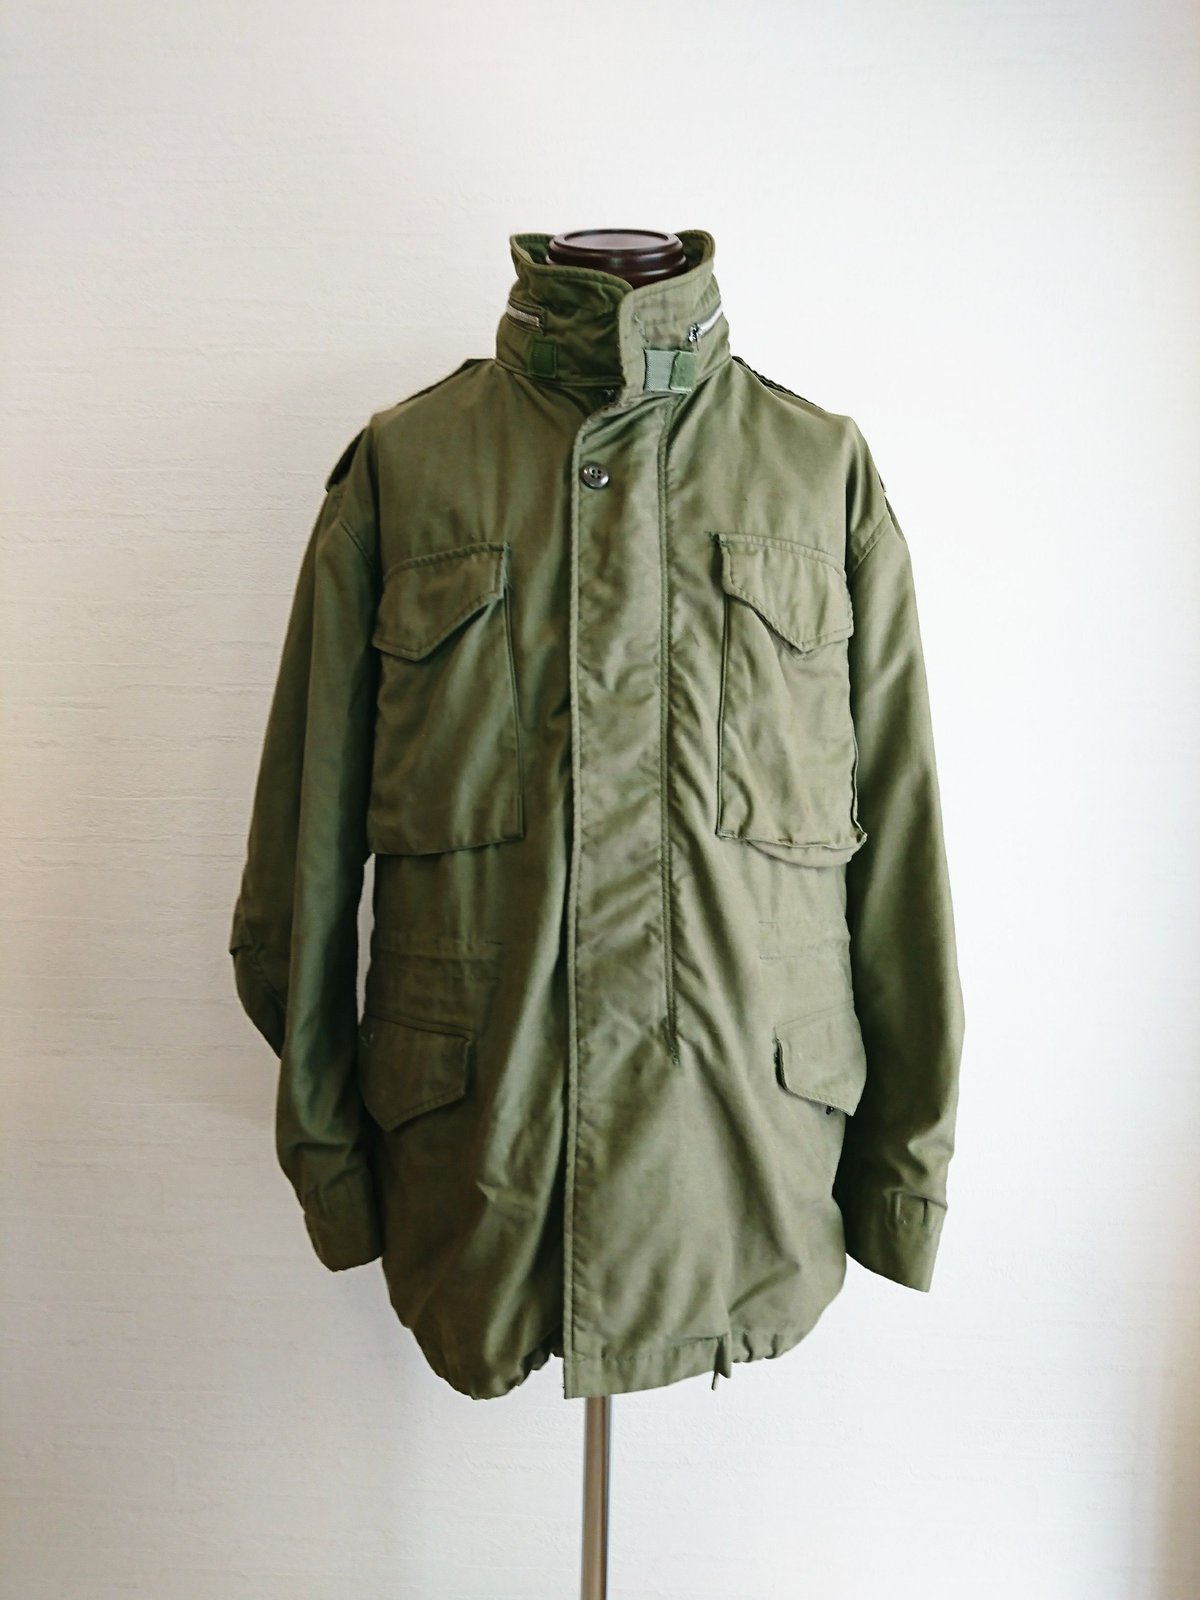 US.Army M-65 Field jacket 2nd model used】アメリカ...